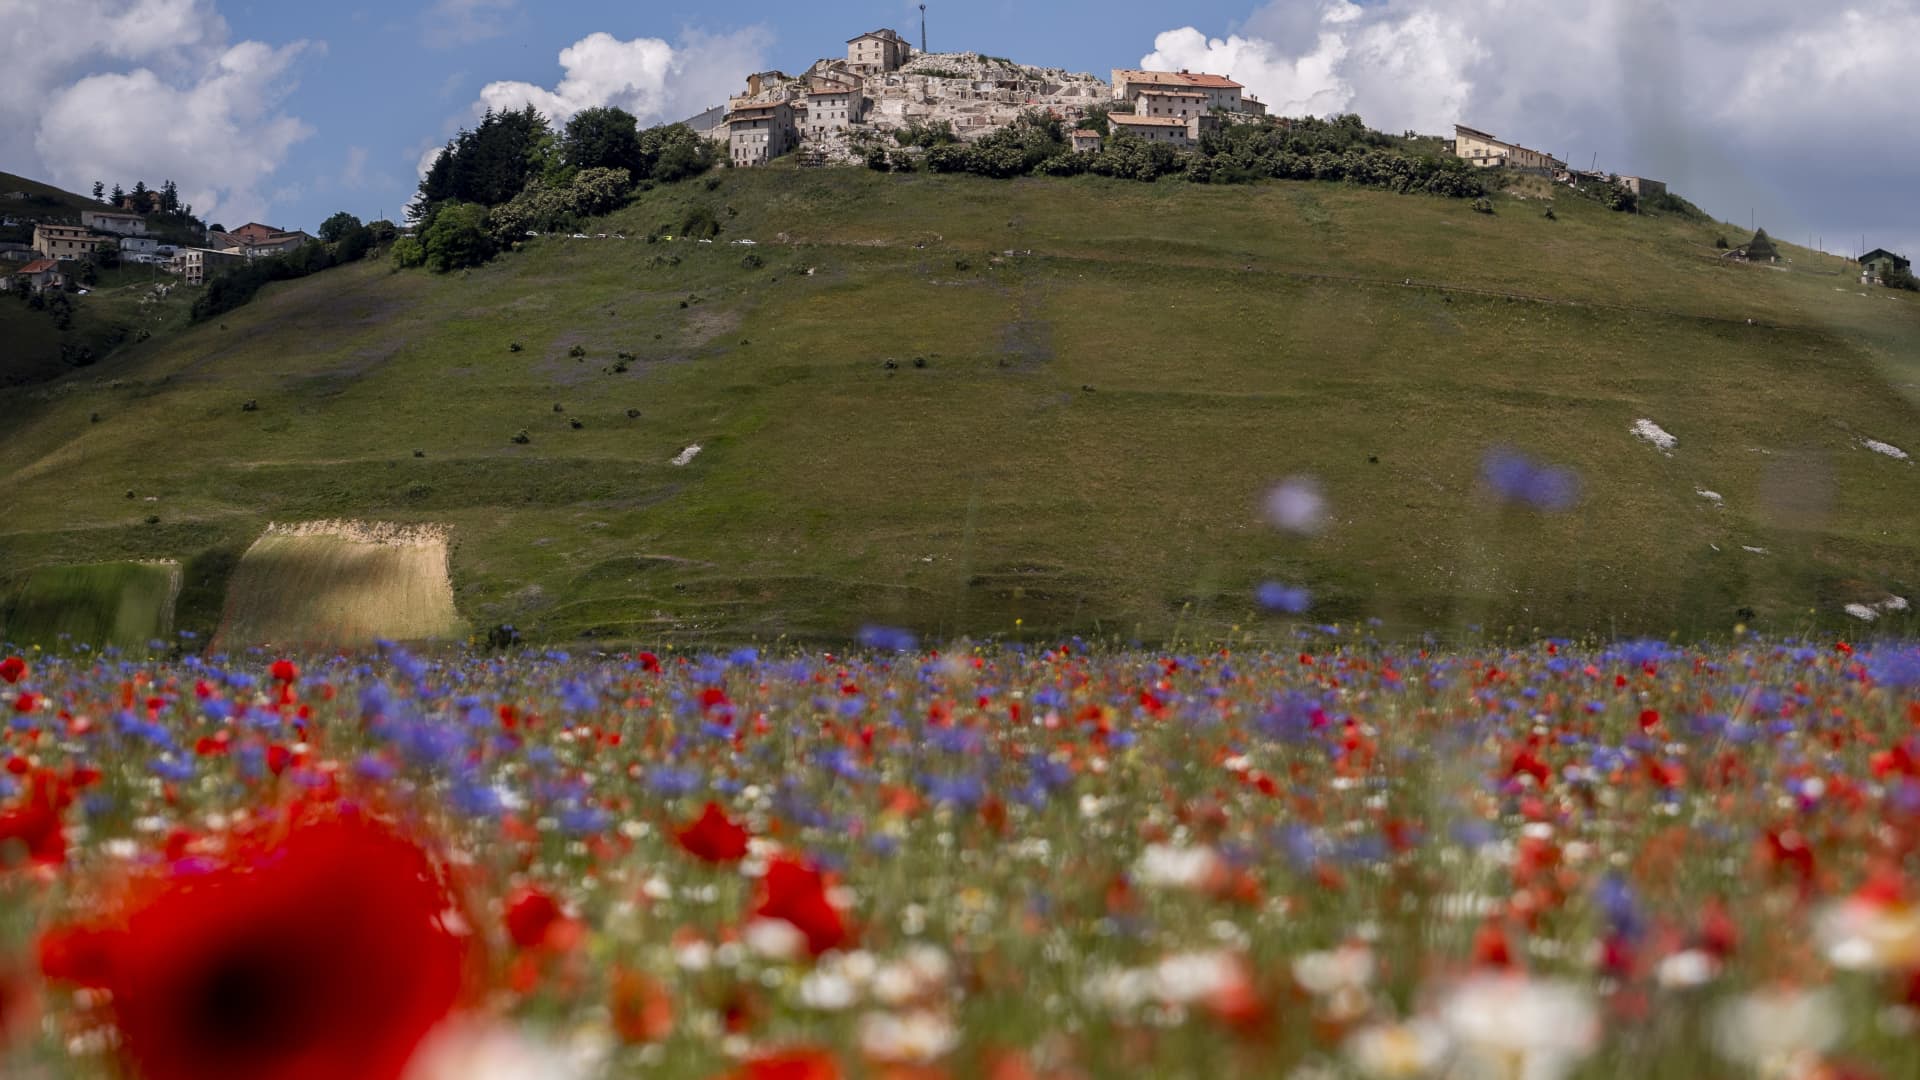 The blooming of flowers below Castelluccio di Norcia, prior to the 2016 earthquake that damaged much of the village.